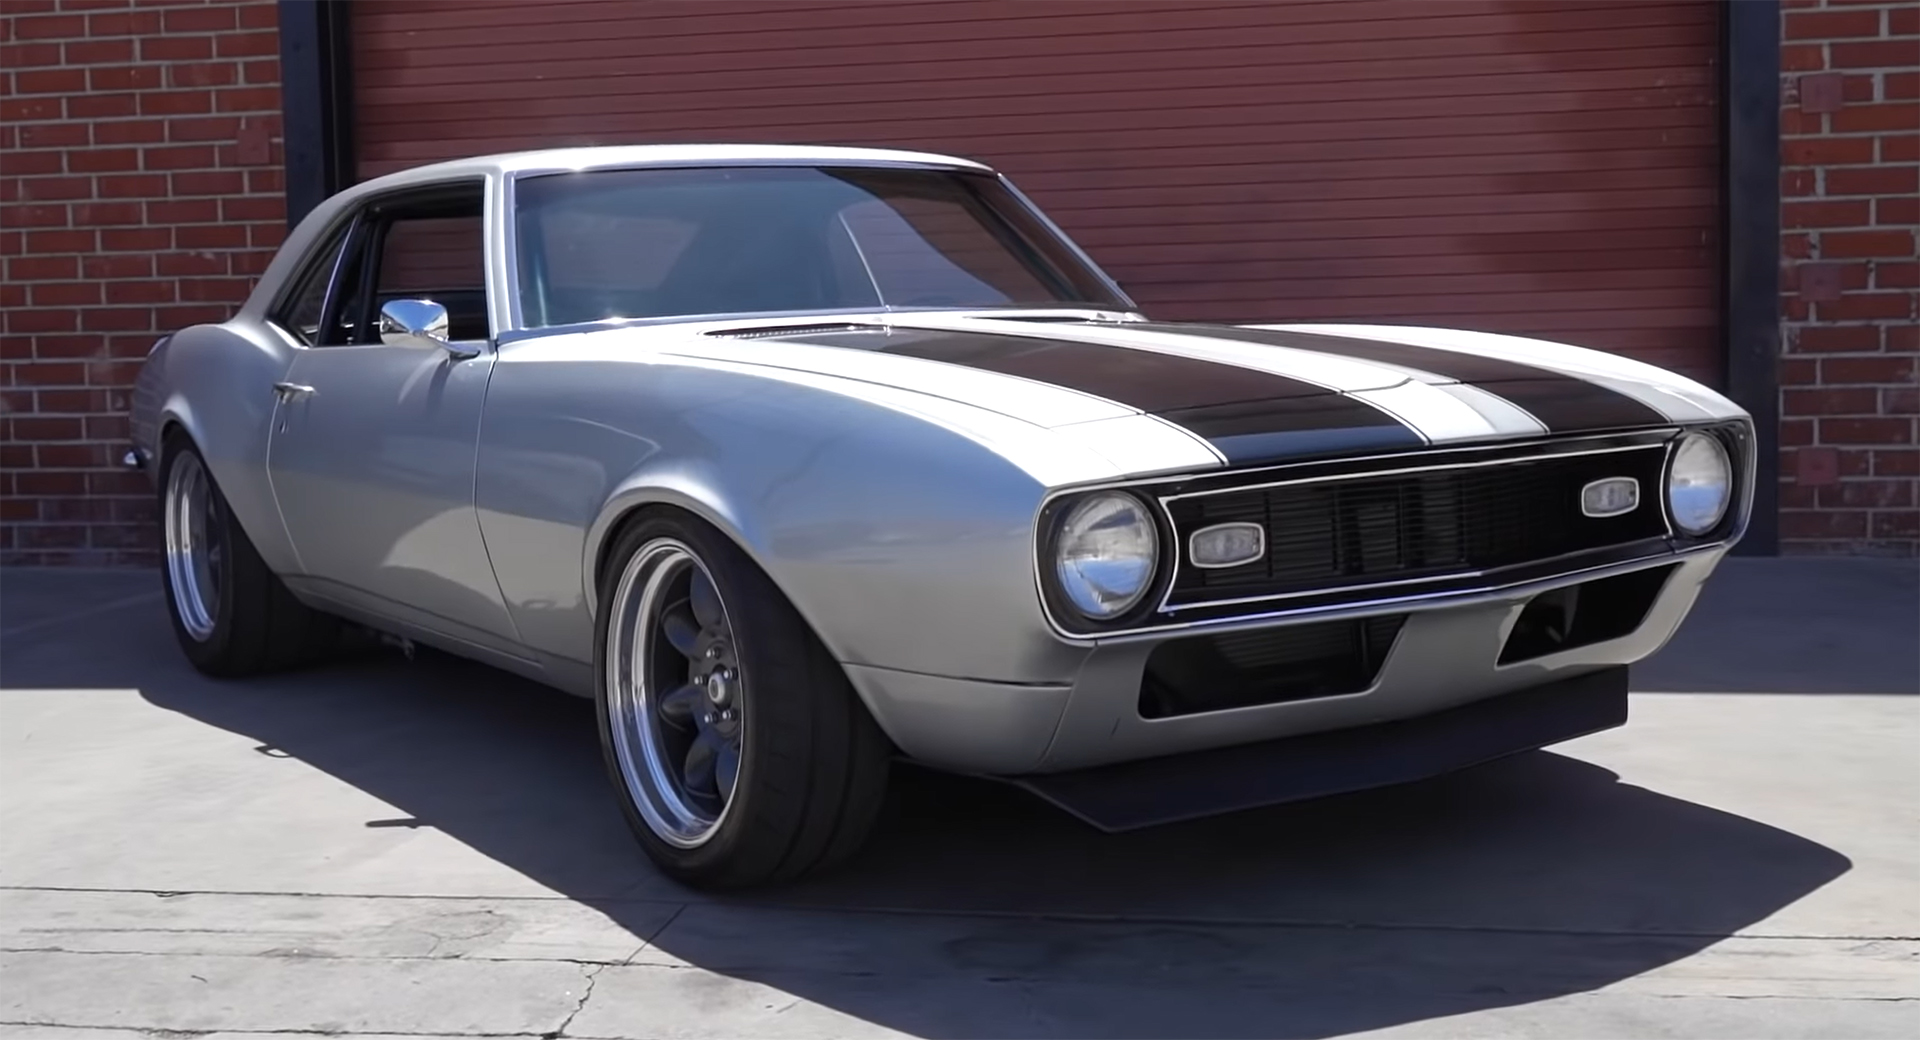 This 1968 Chevy Camaro Is A Late-Model Stock Car At Heart